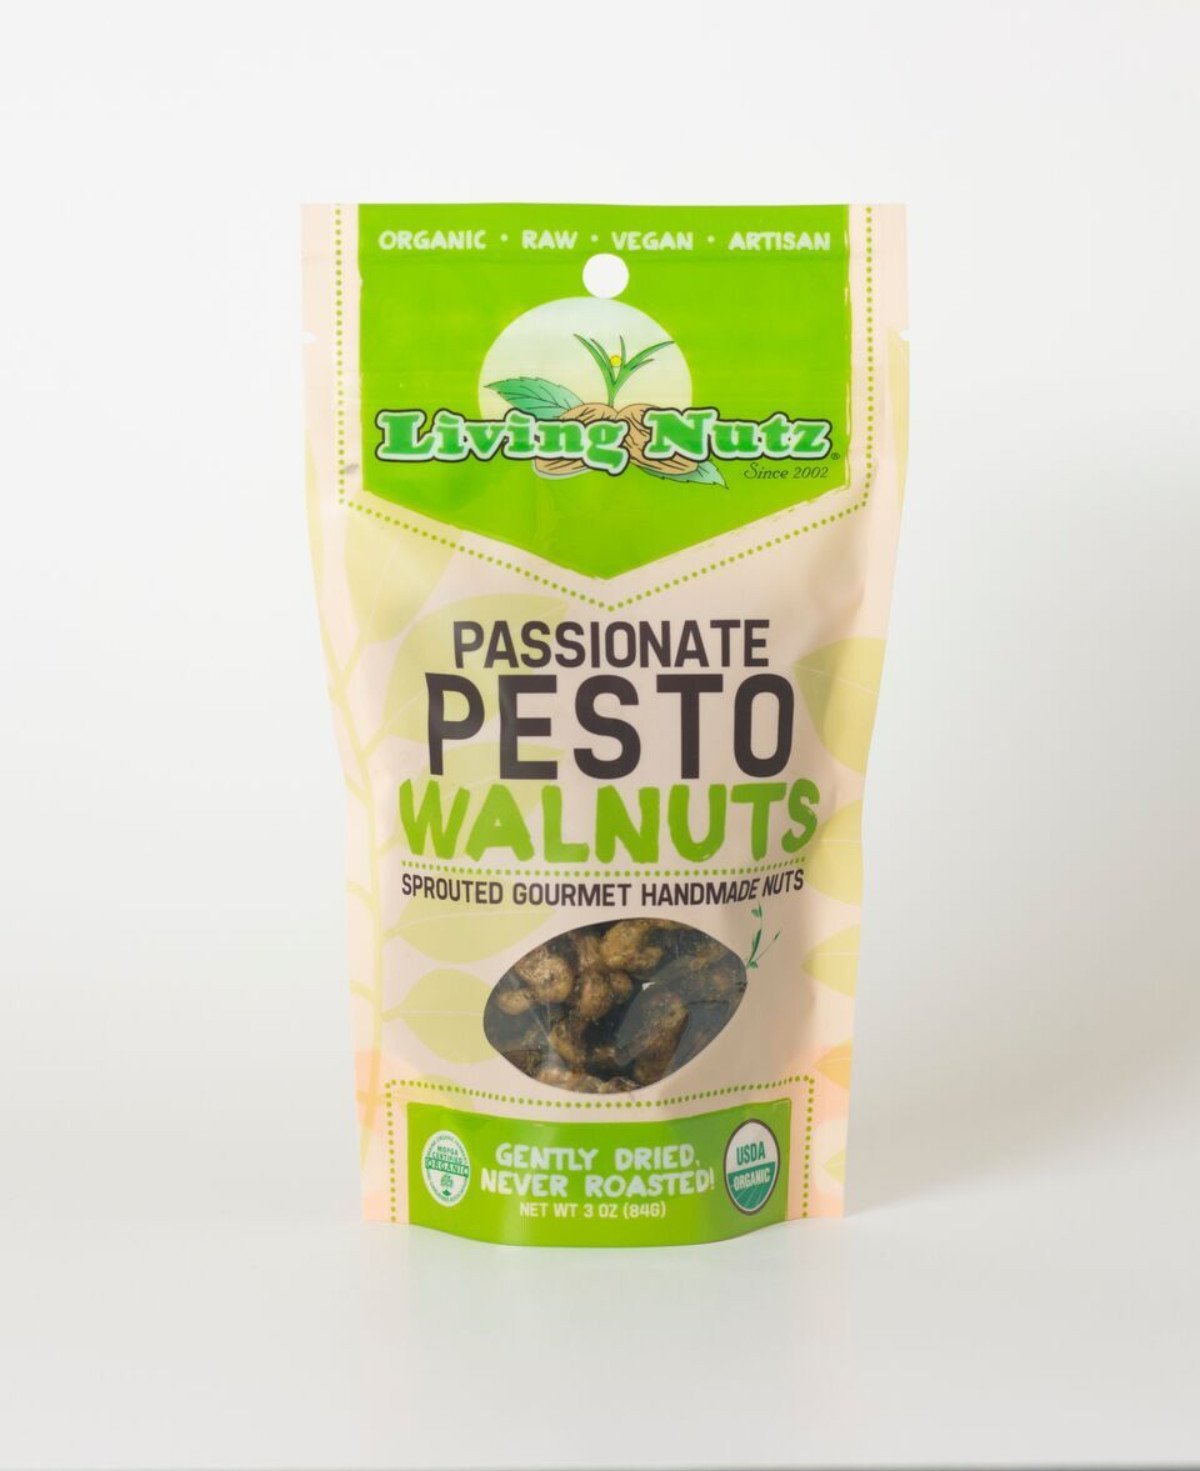 Organic raw sprouted nuts. Sprouted flavored raw walnuts &amp; pesto. Organic nut snacks. Living nuts.